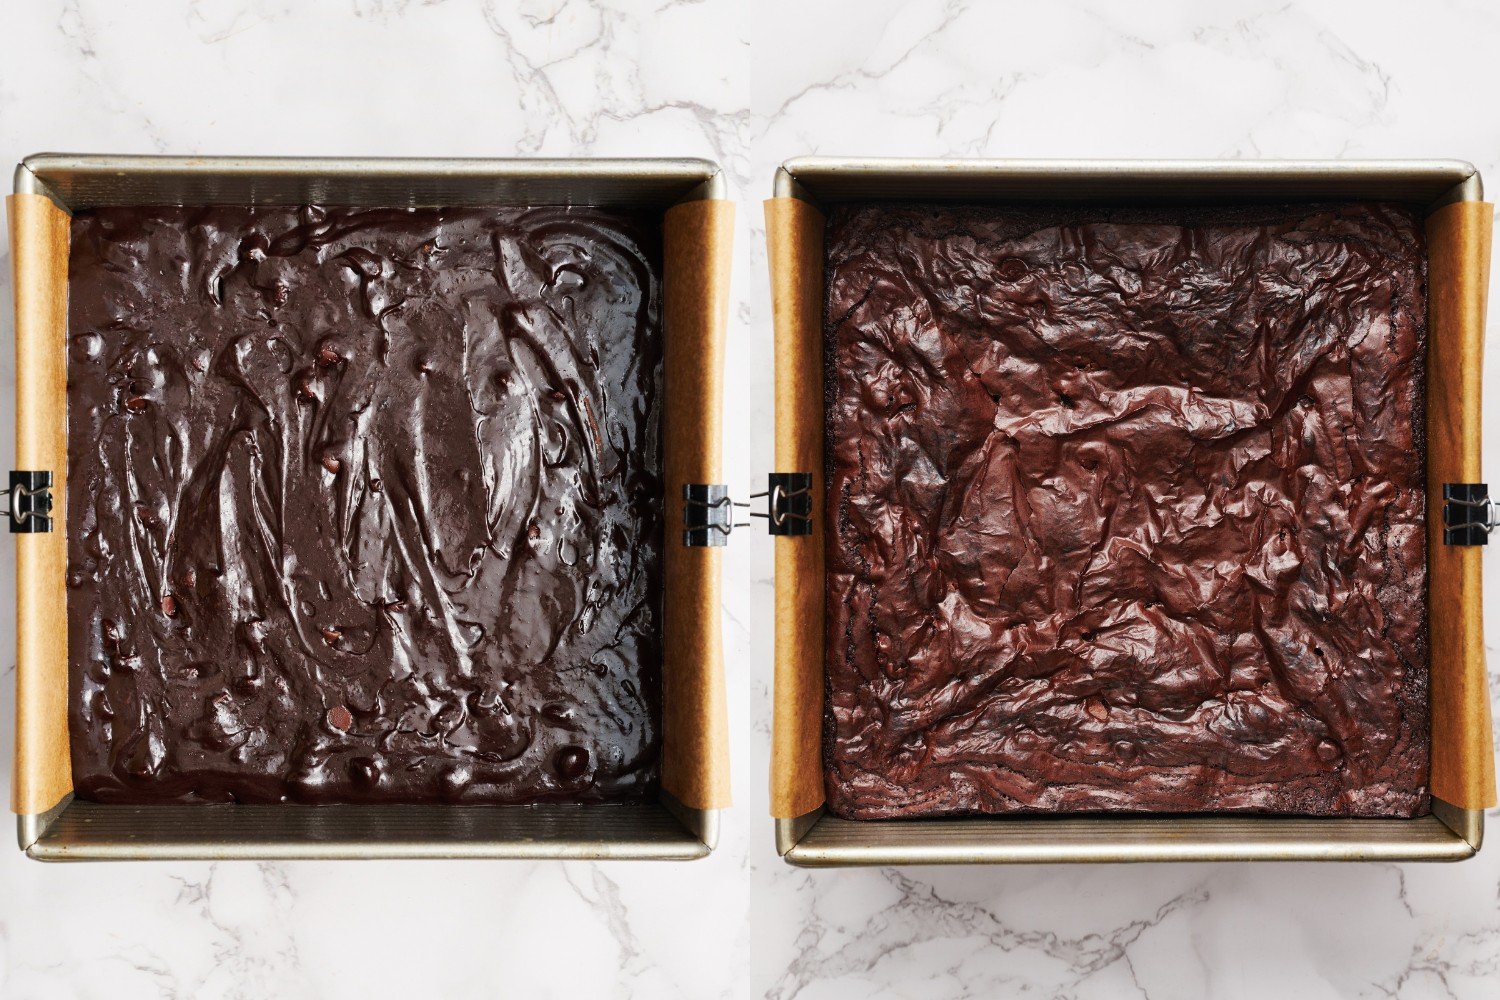 side-by-side pans of brownies - the first ready to bake, and the second baked.